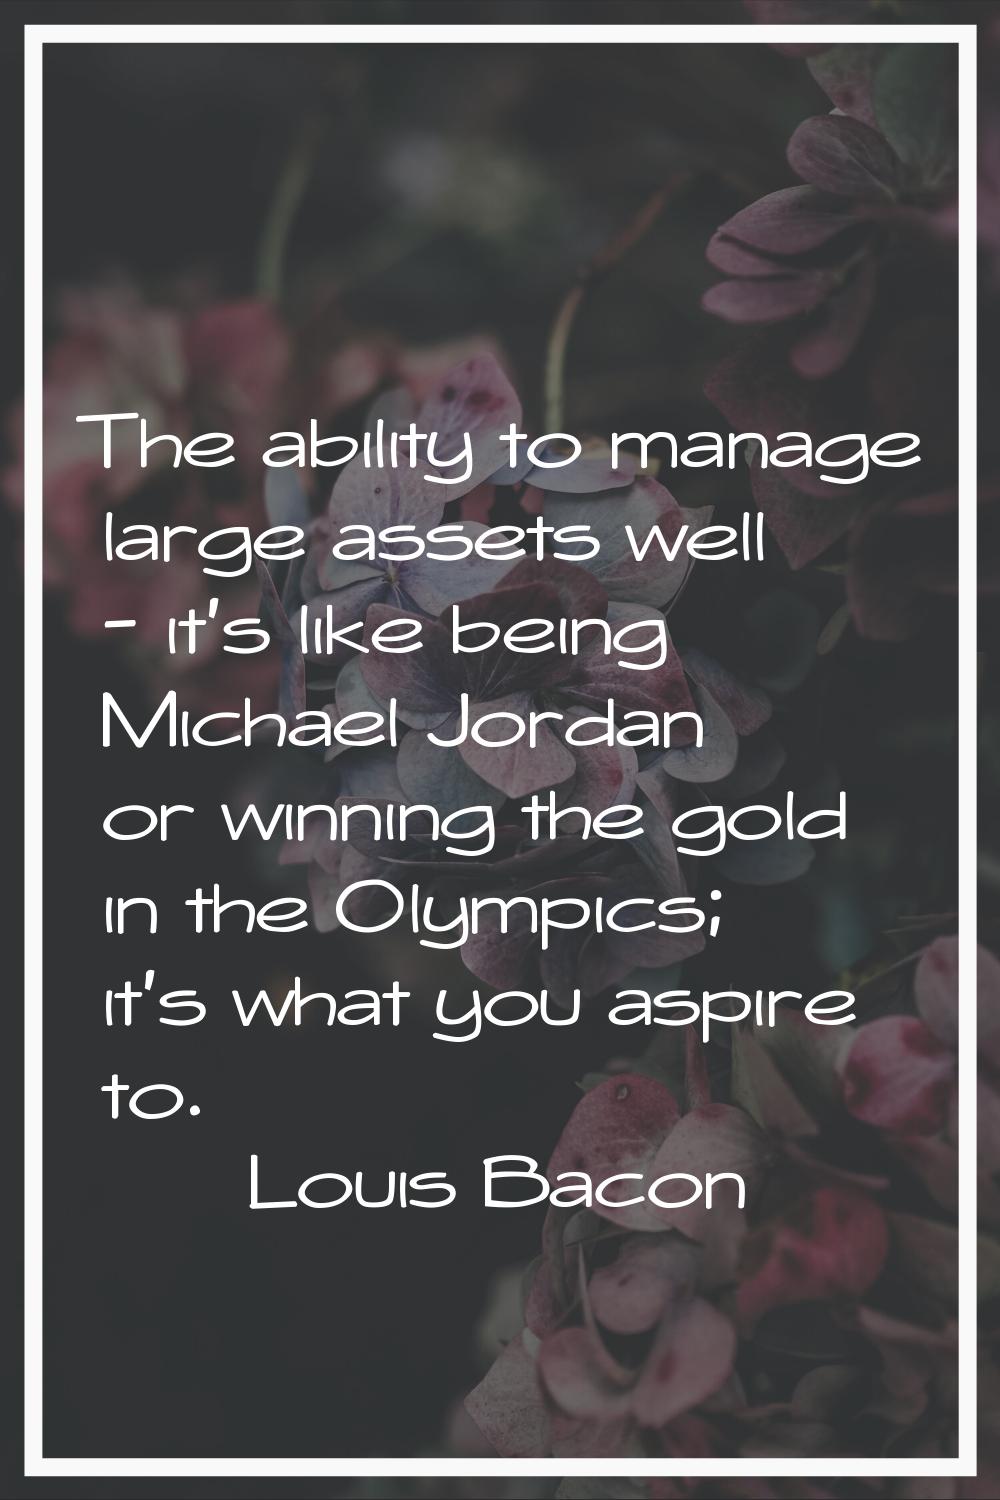 The ability to manage large assets well - it's like being Michael Jordan or winning the gold in the